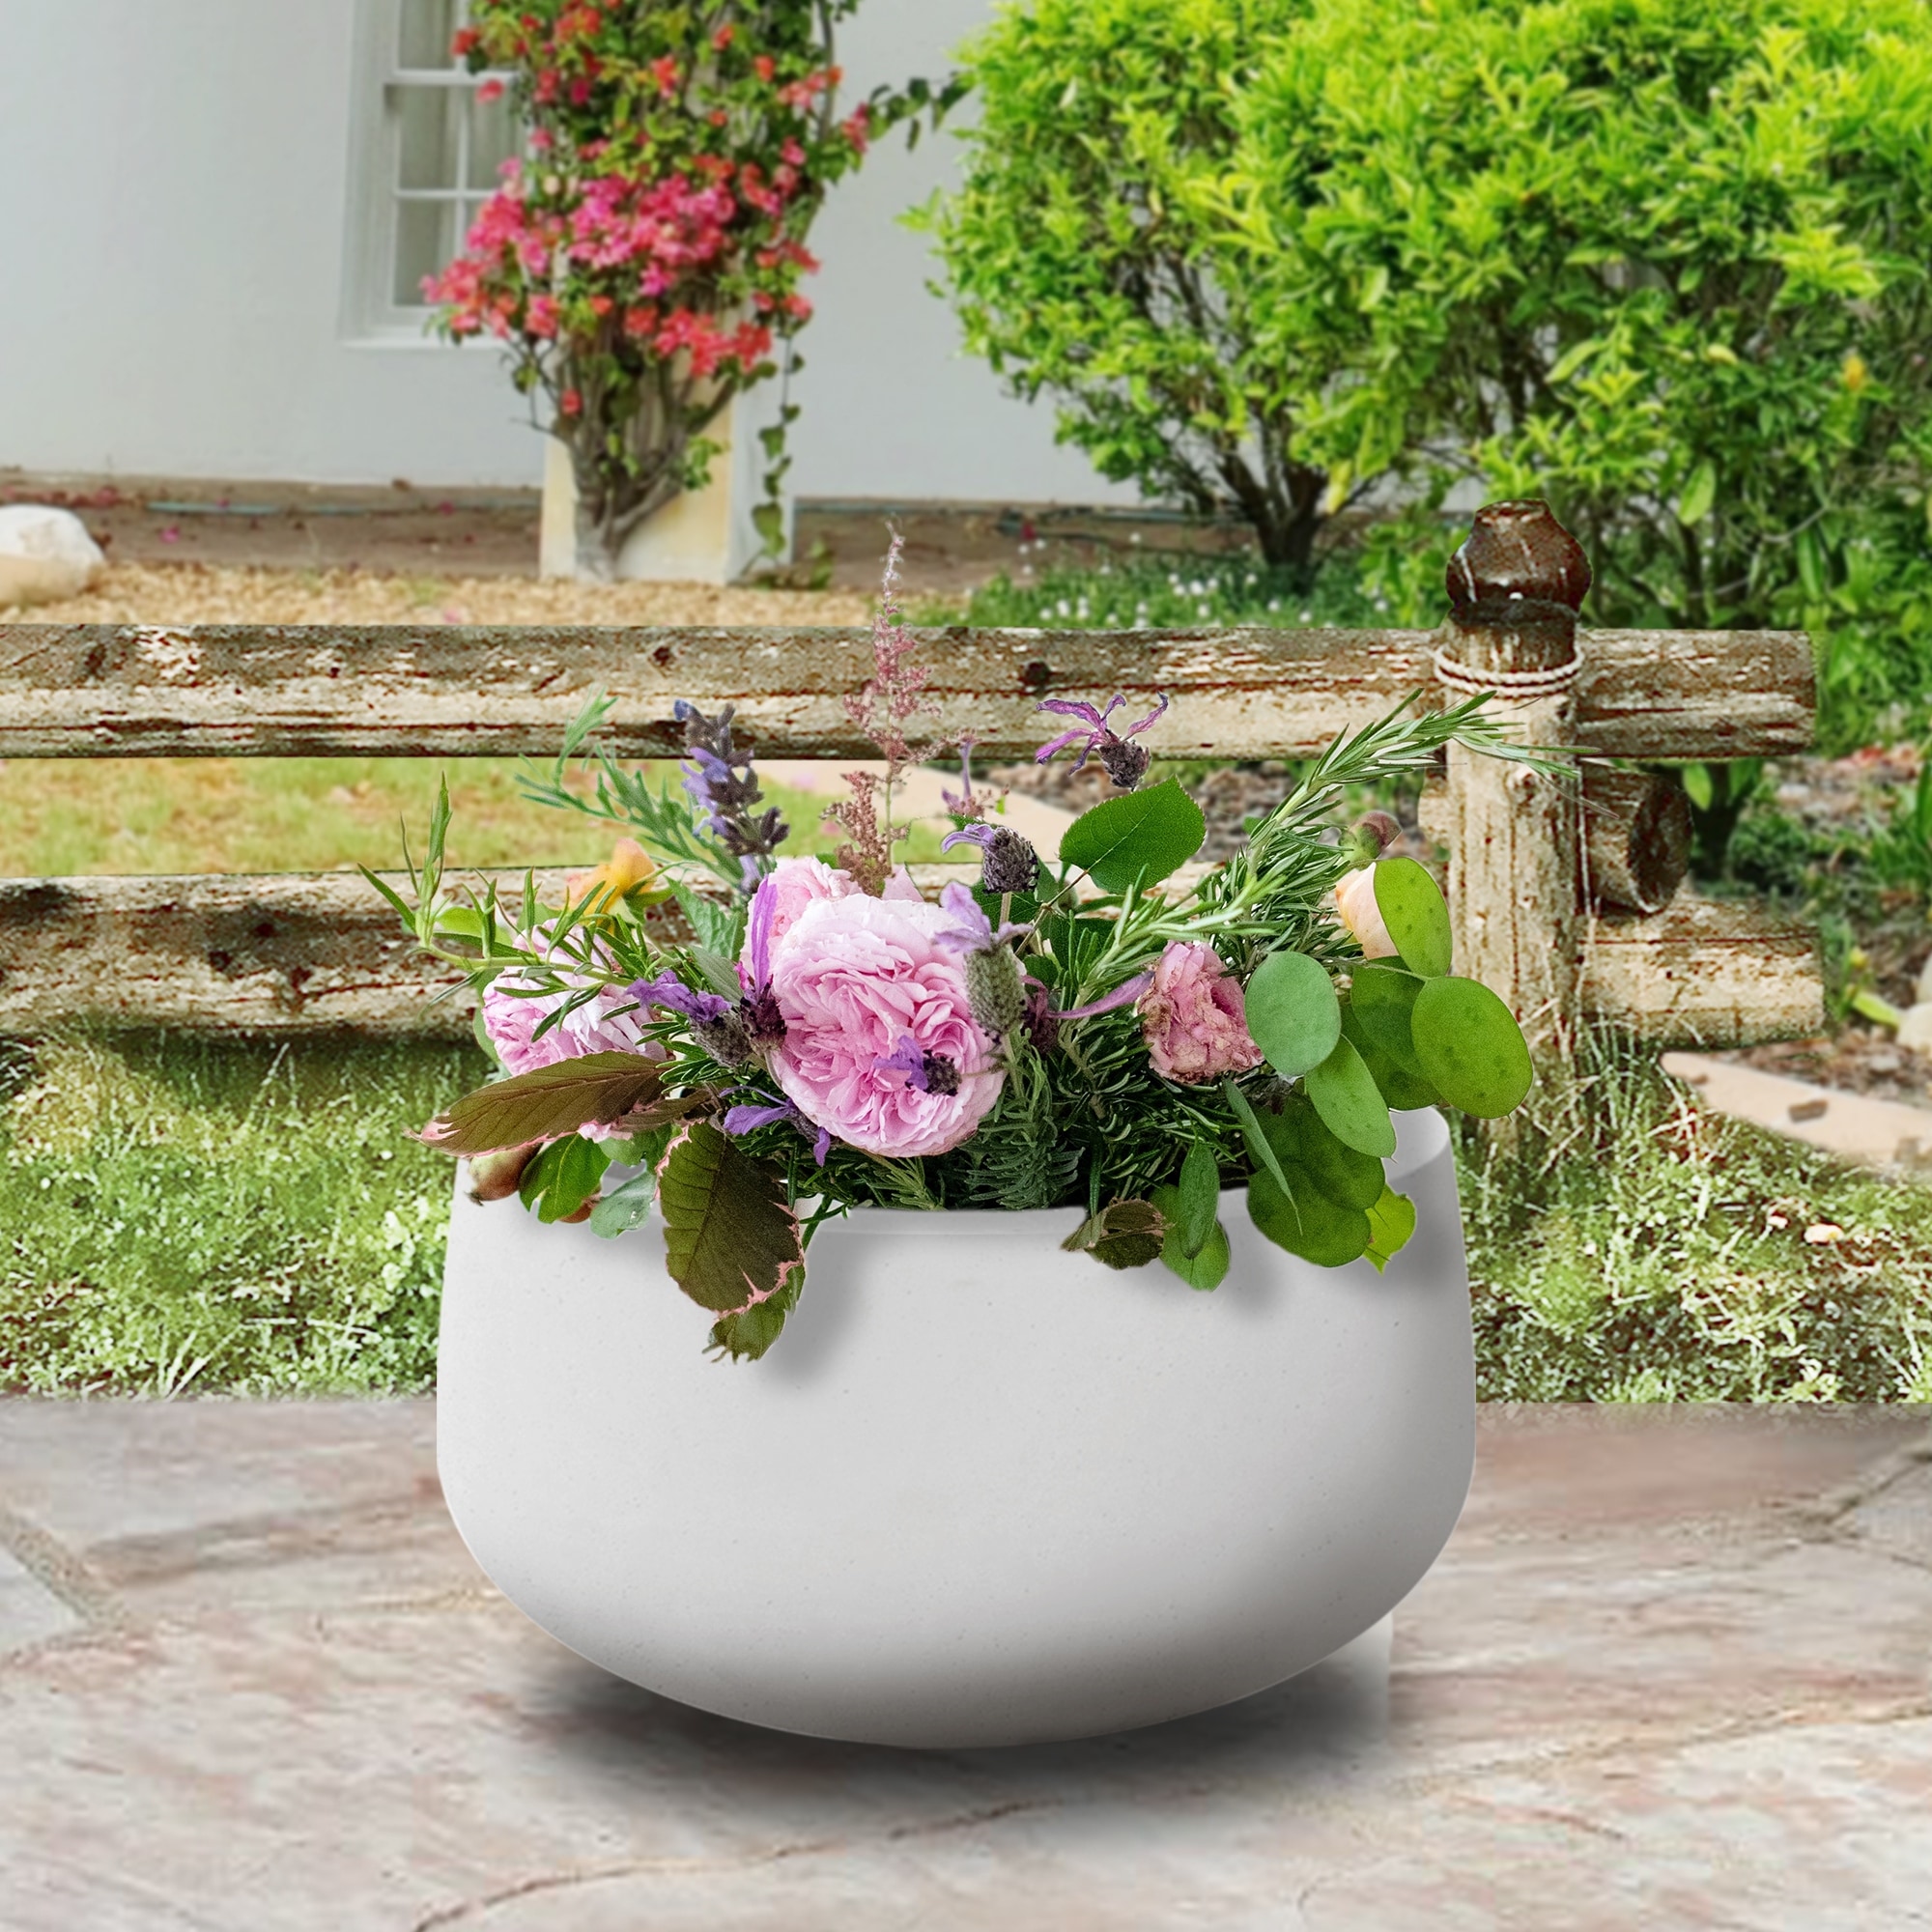 PLANTARA 14 in. D Round Concrete planter with Drainage Hole